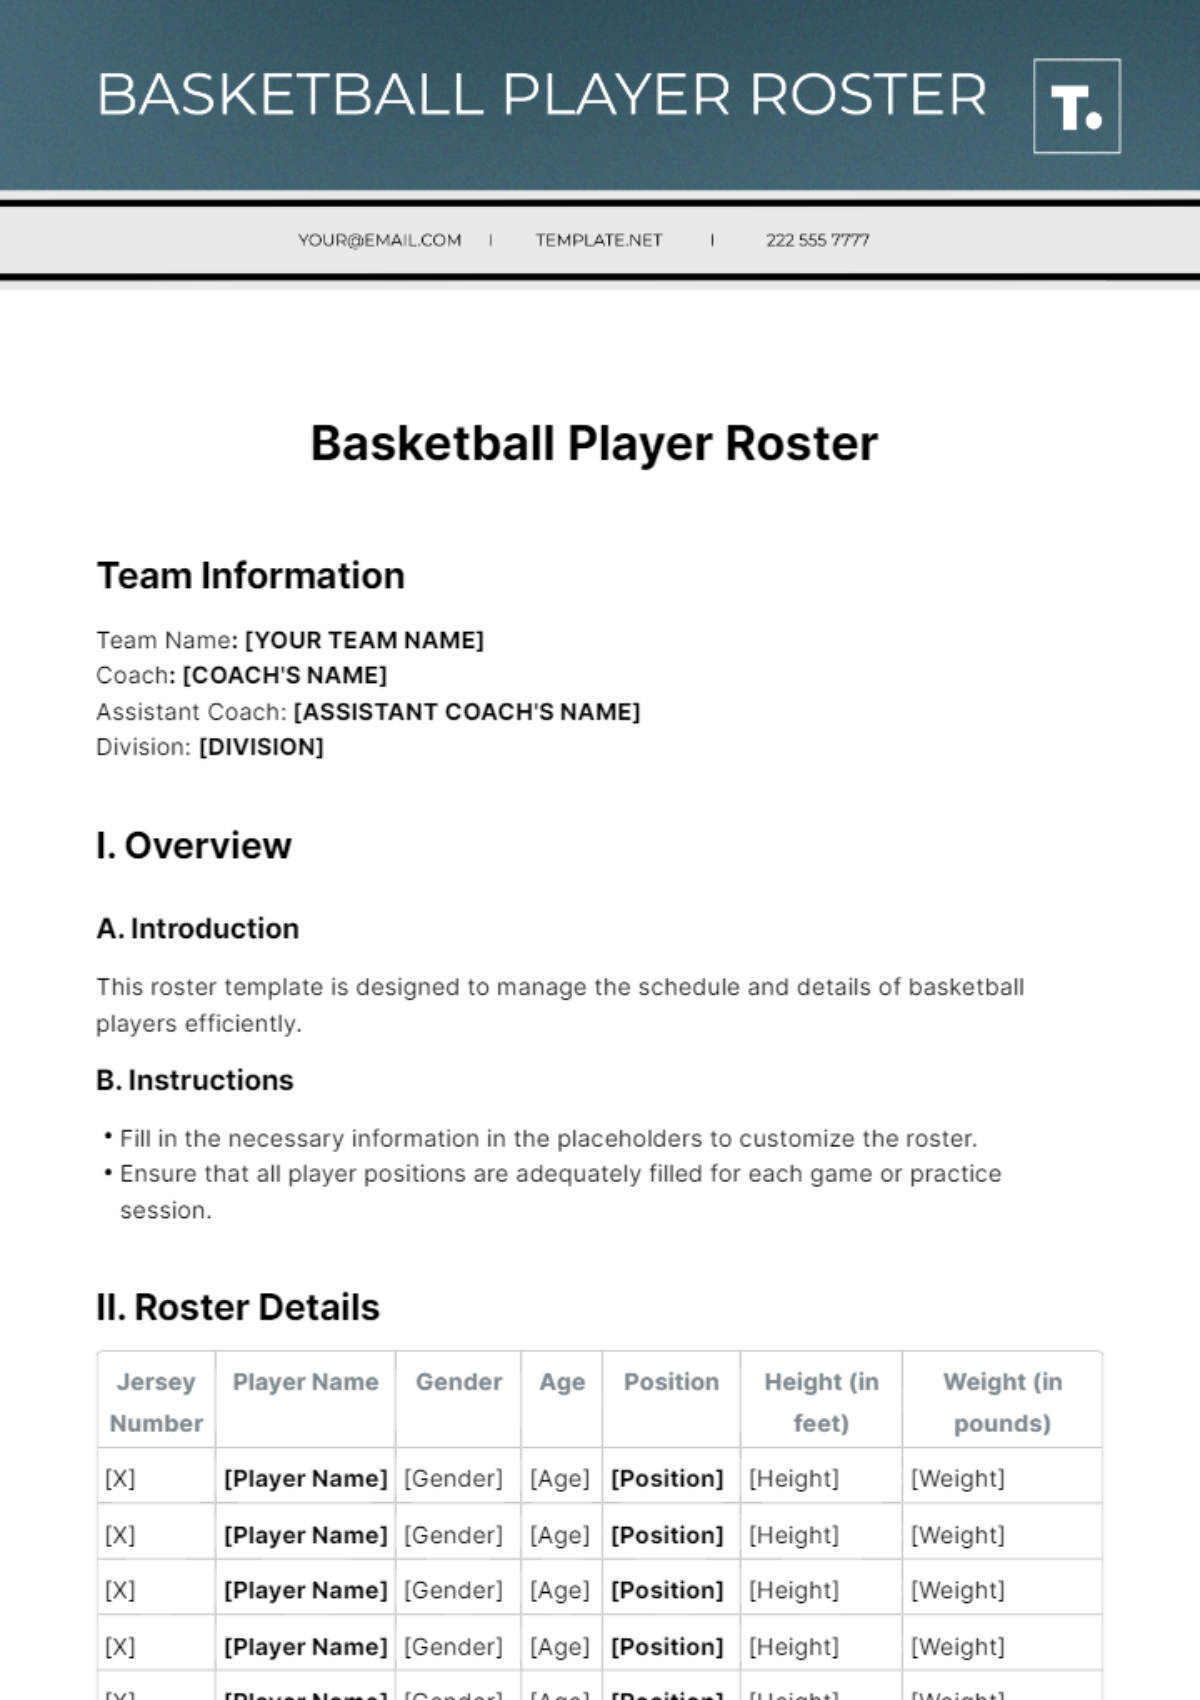 Free Basketball Player Roster Template